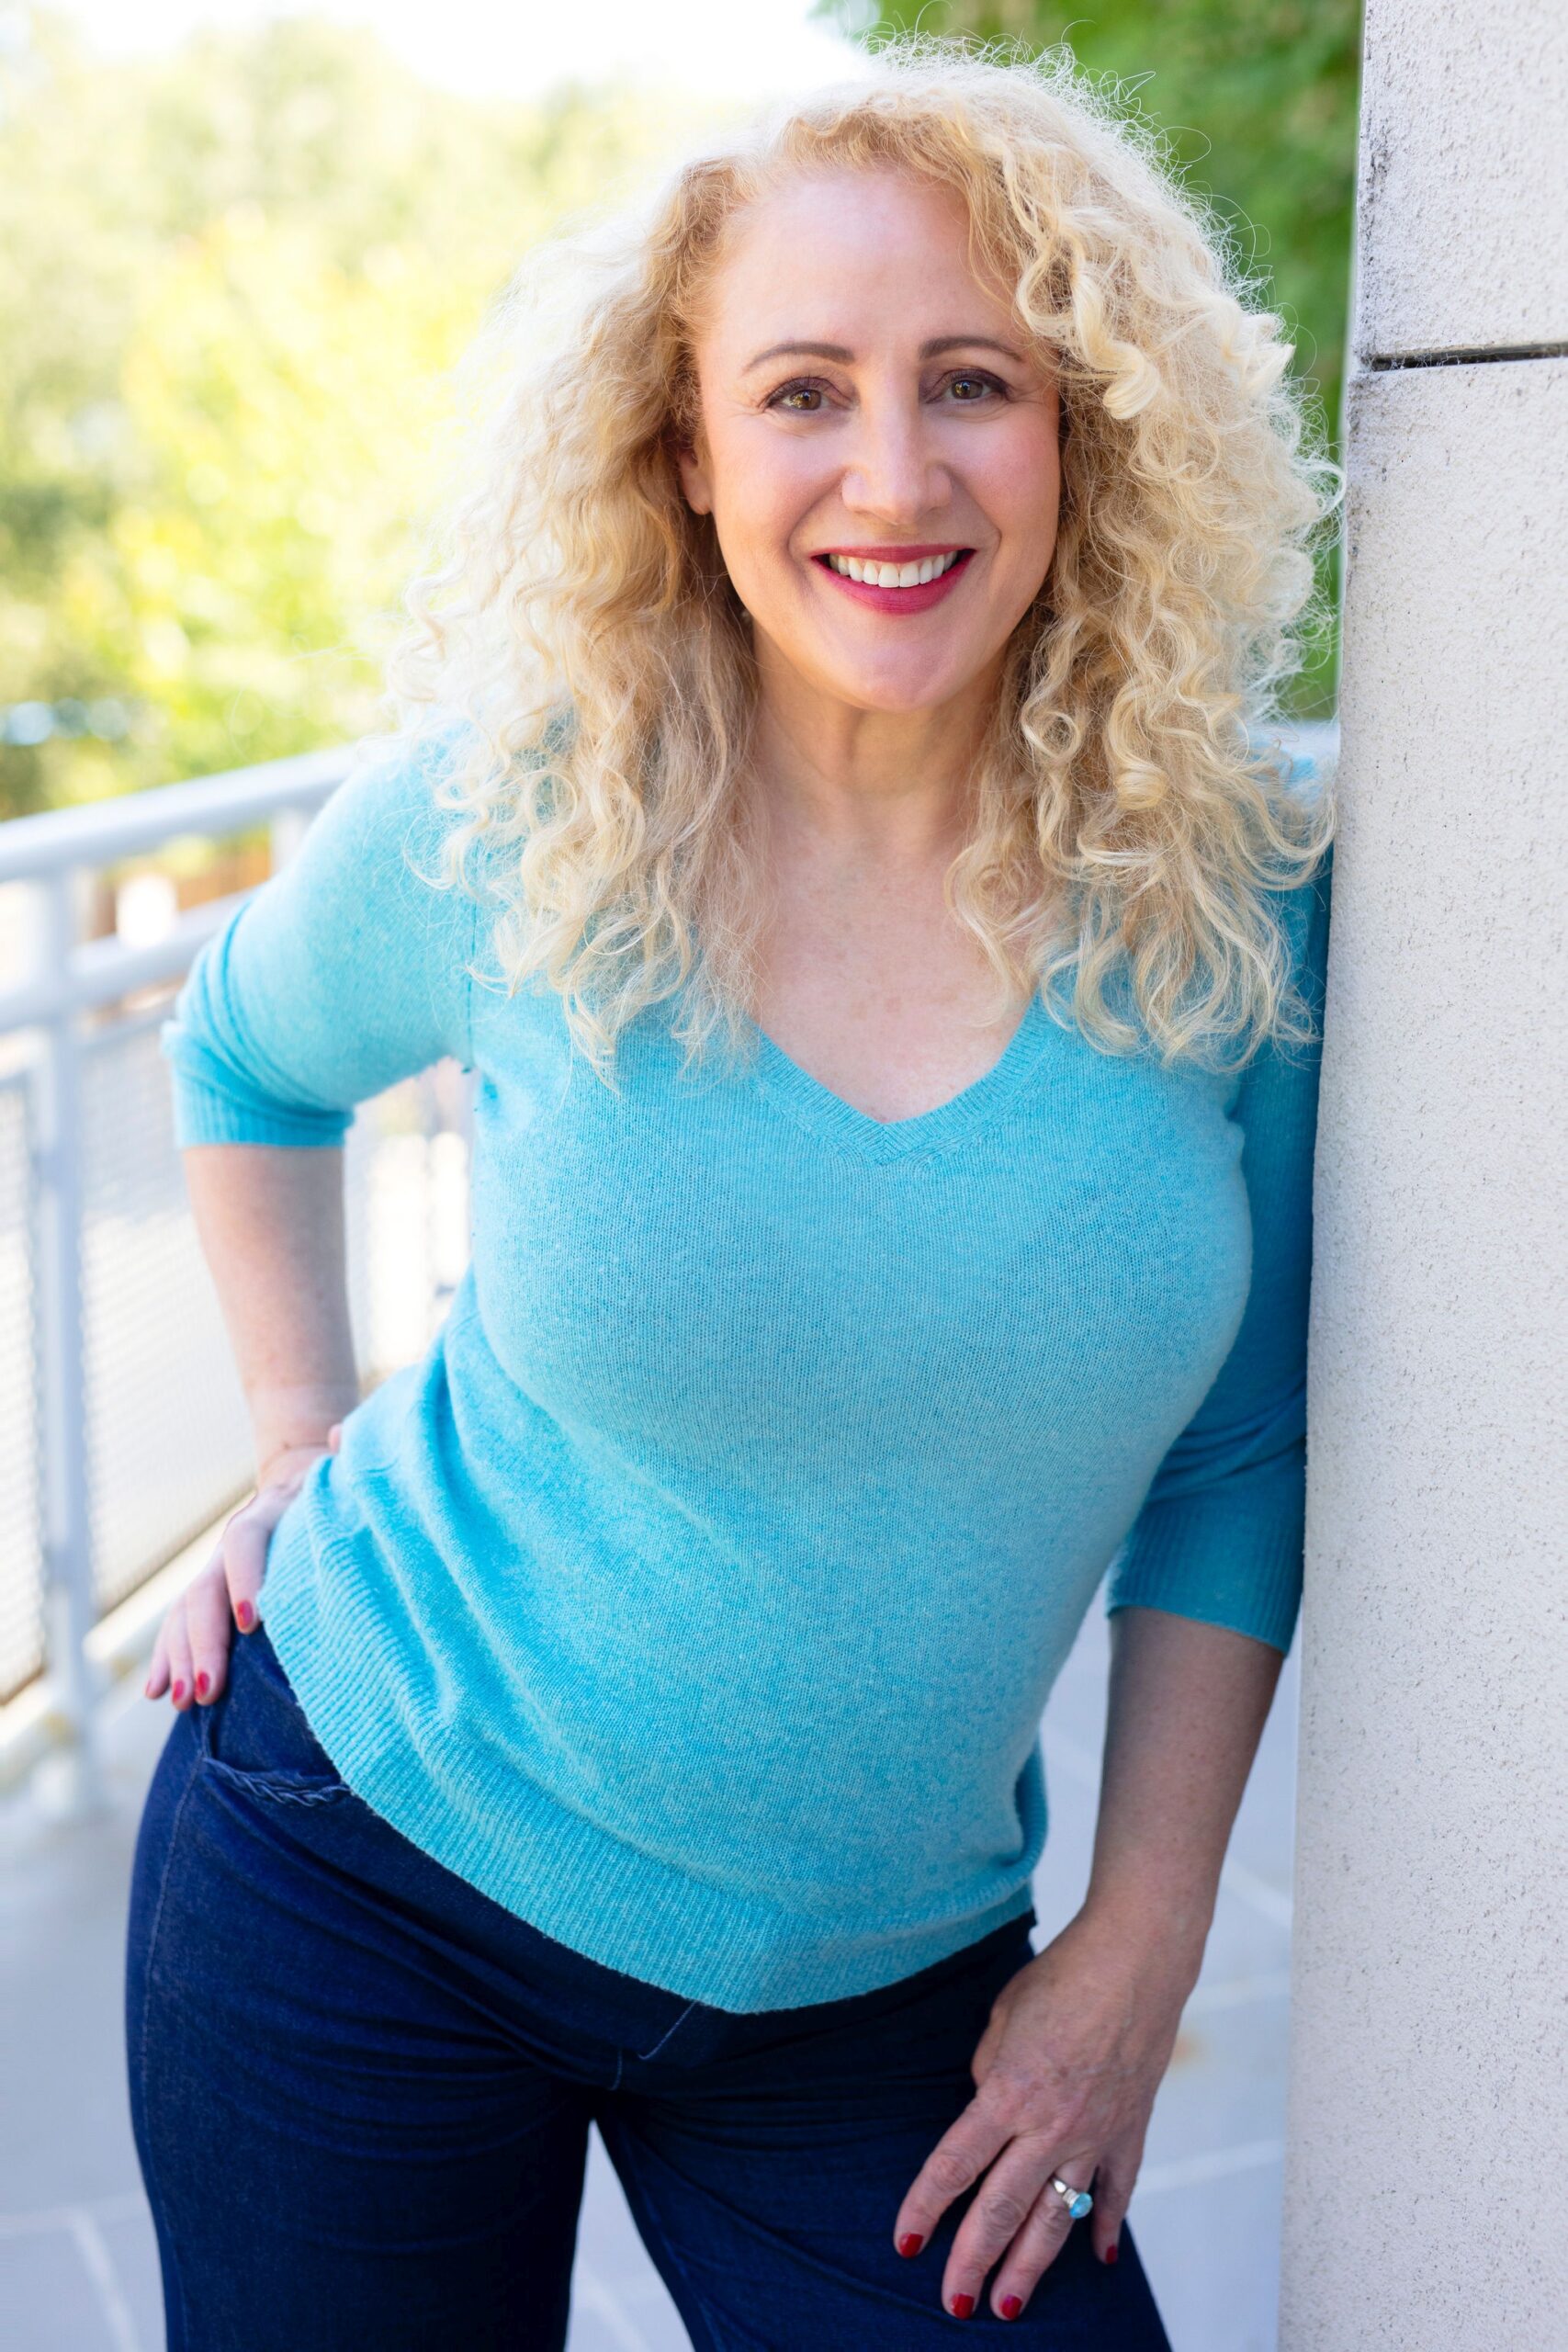 Dr. Lori Buckley is a transformation coach and relationship and sex expert in Pasadena, CA